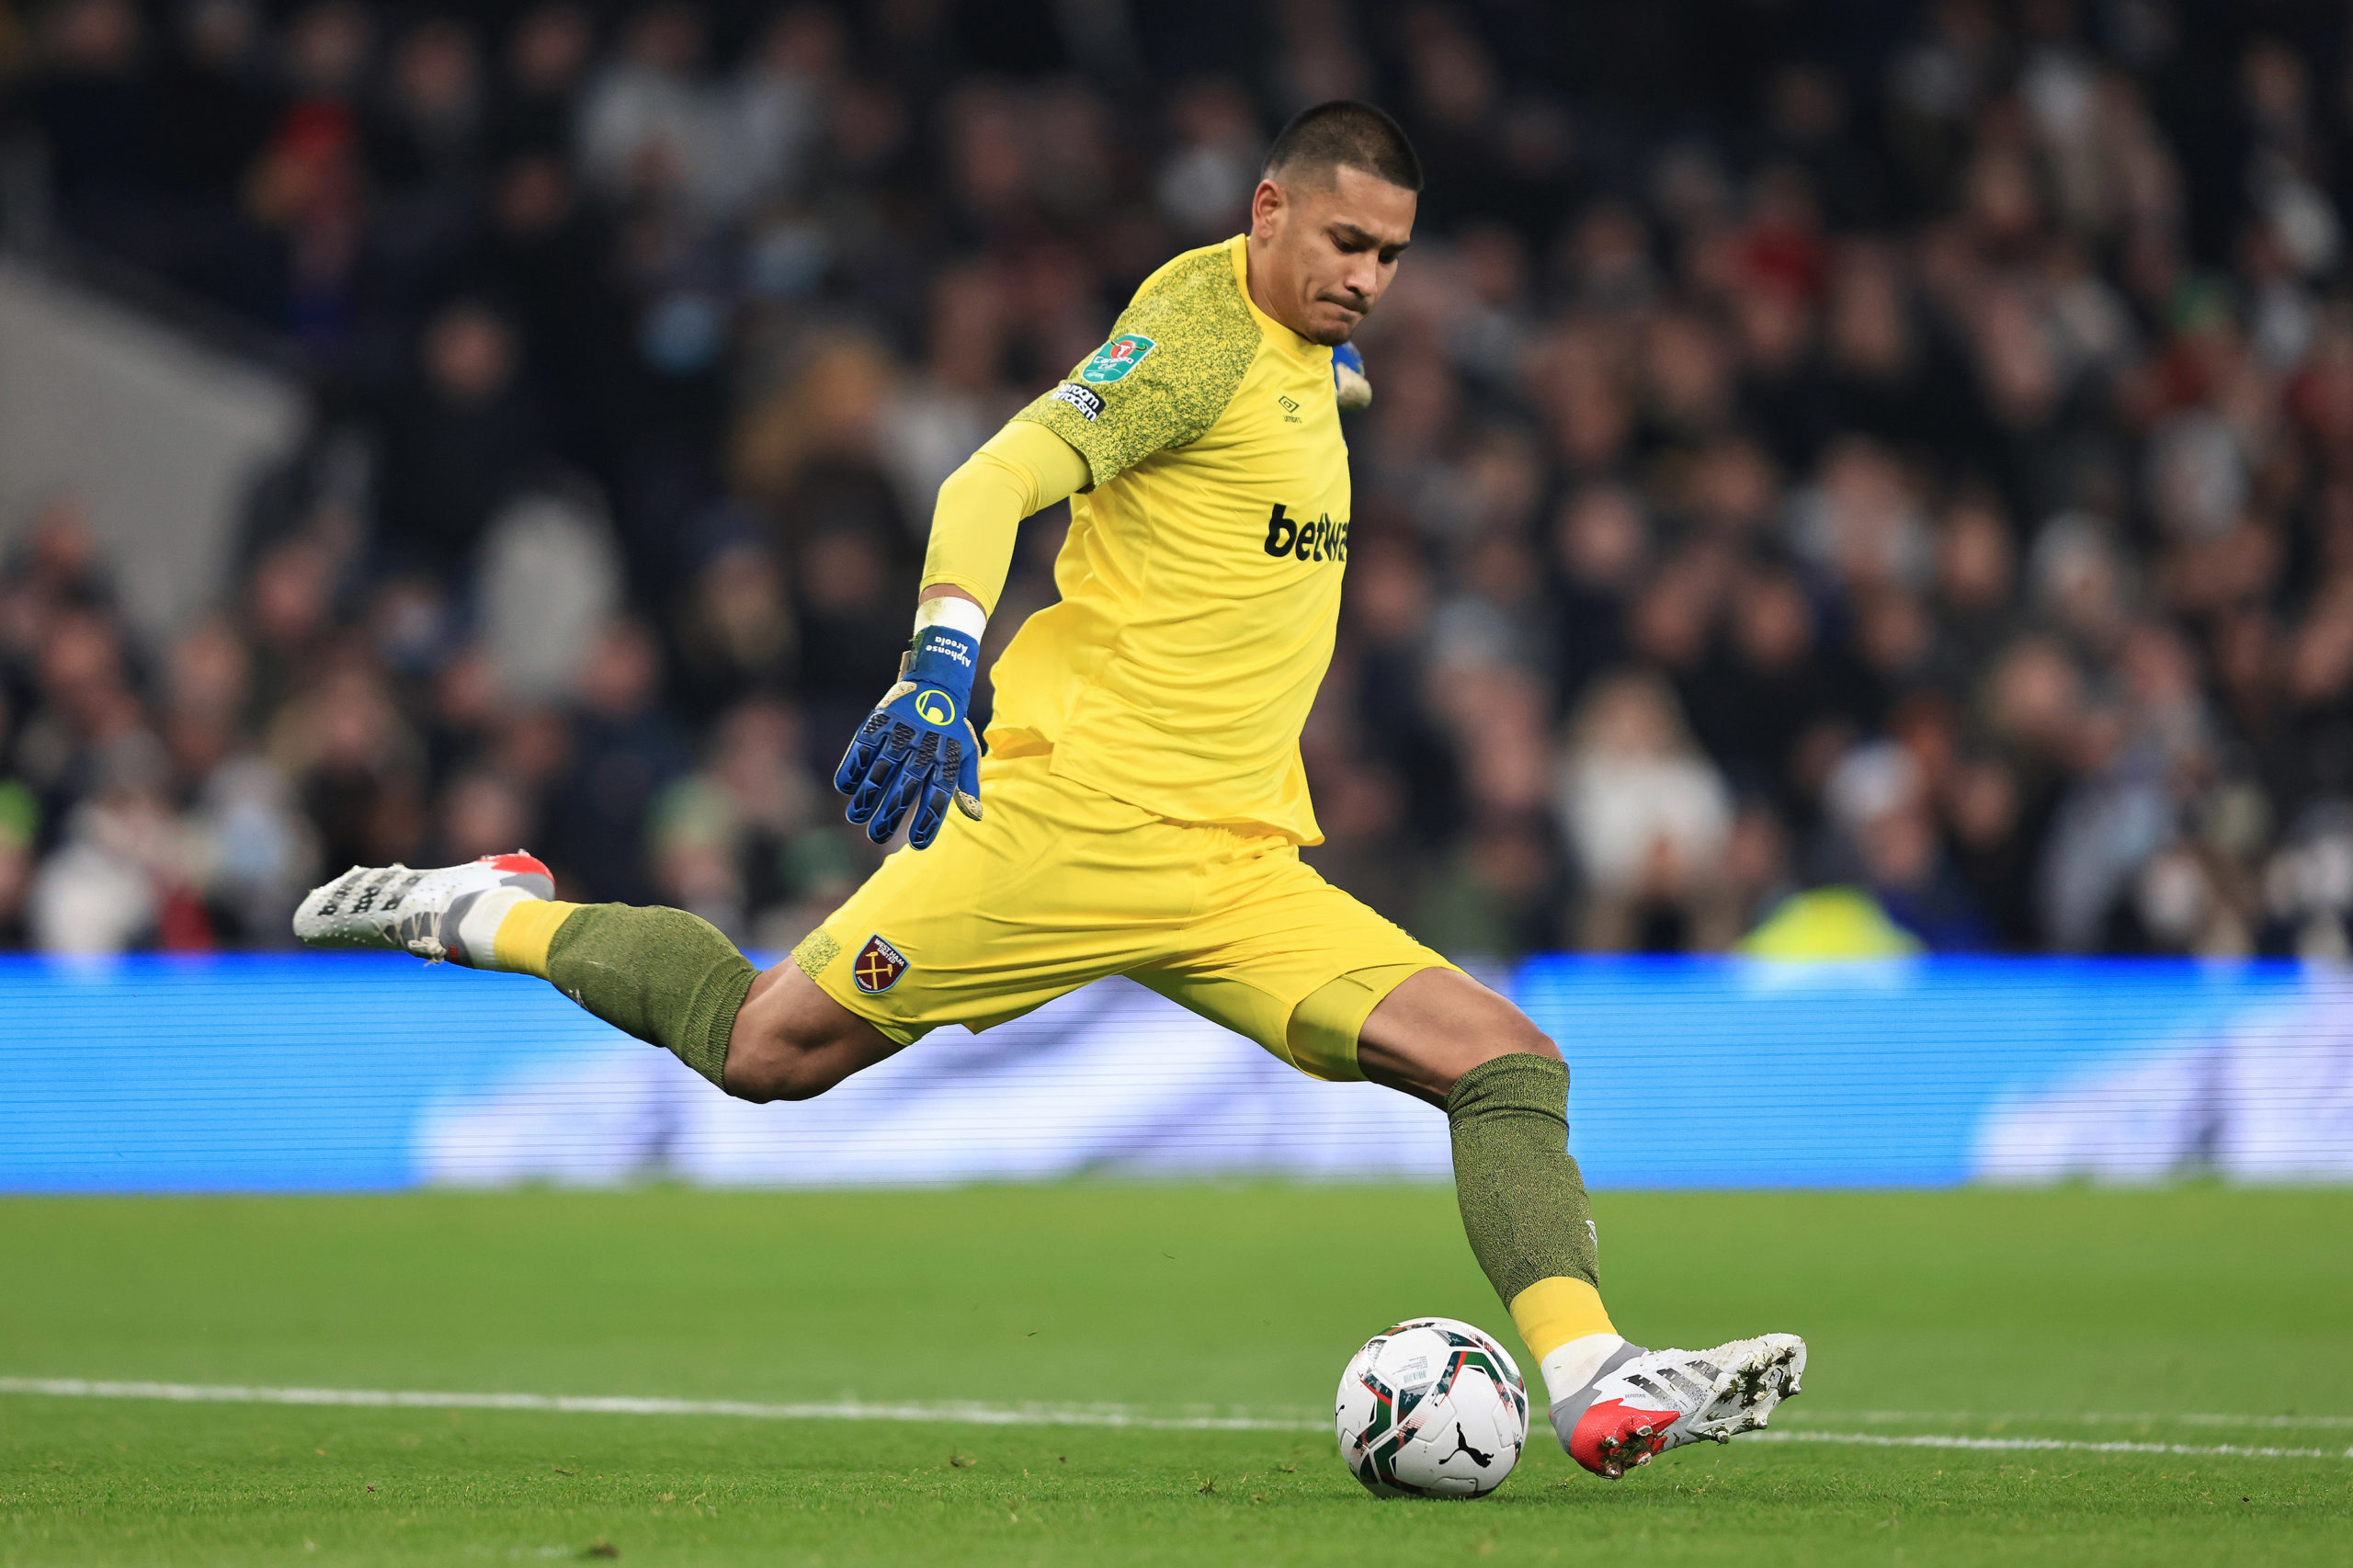 West Ham United boss David Moyes could be all set to send Alphonse Areola back to Paris Saint-Germain